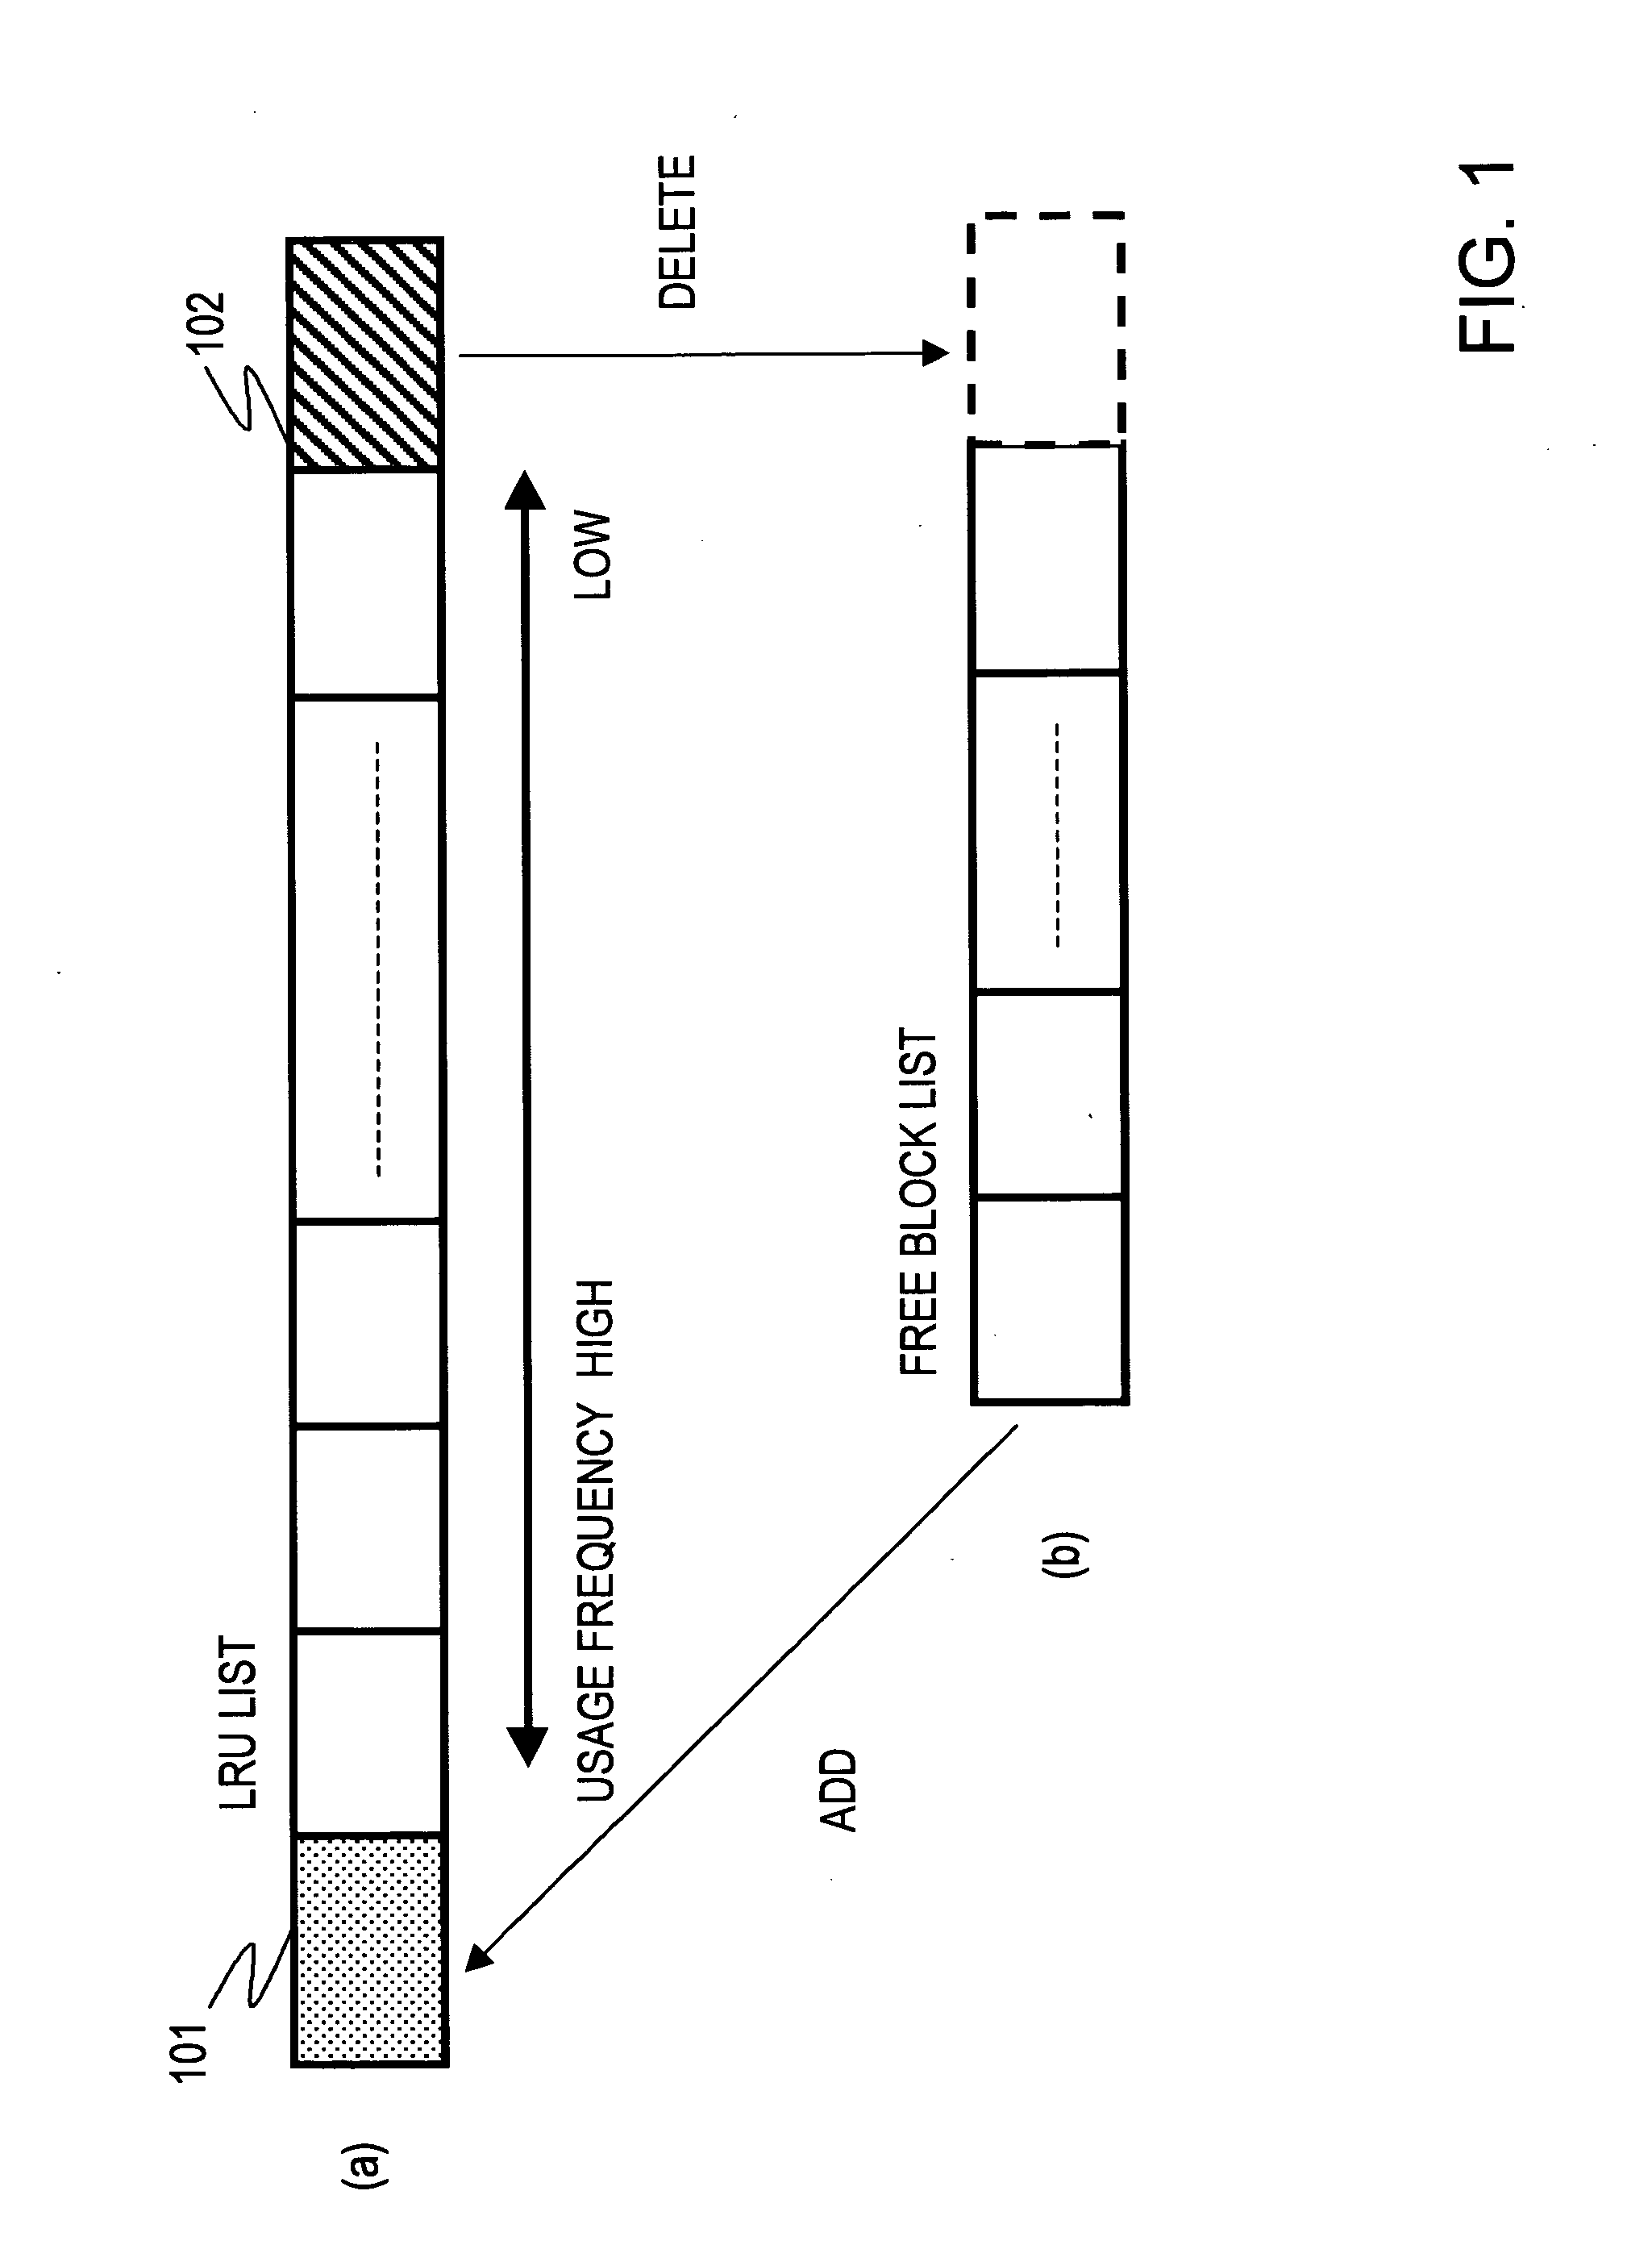 Cache device, cache data management method, and computer program